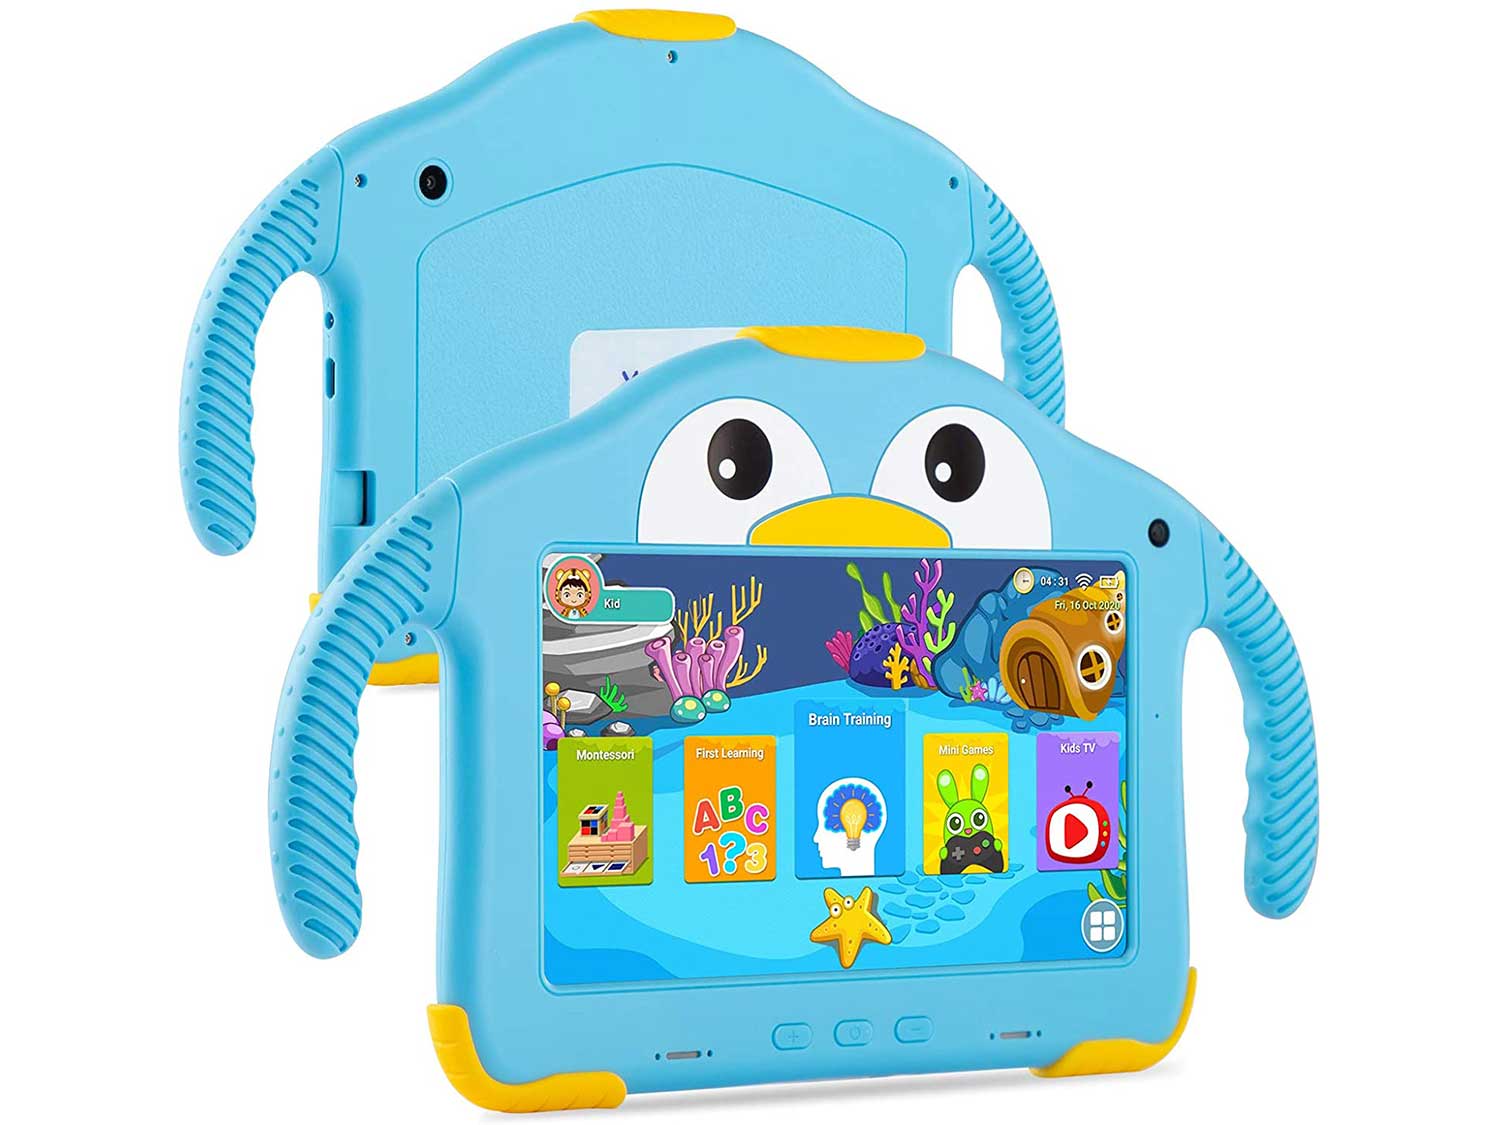 Tablet for Toddlers Tablet Android Kids Tablet with WiFi Dual Camera 1GB 32GB Storage 1024 x 600 Touch Screen Parental Control Mode Google Playstore YouTube Netflix for Boys Girls Android 10